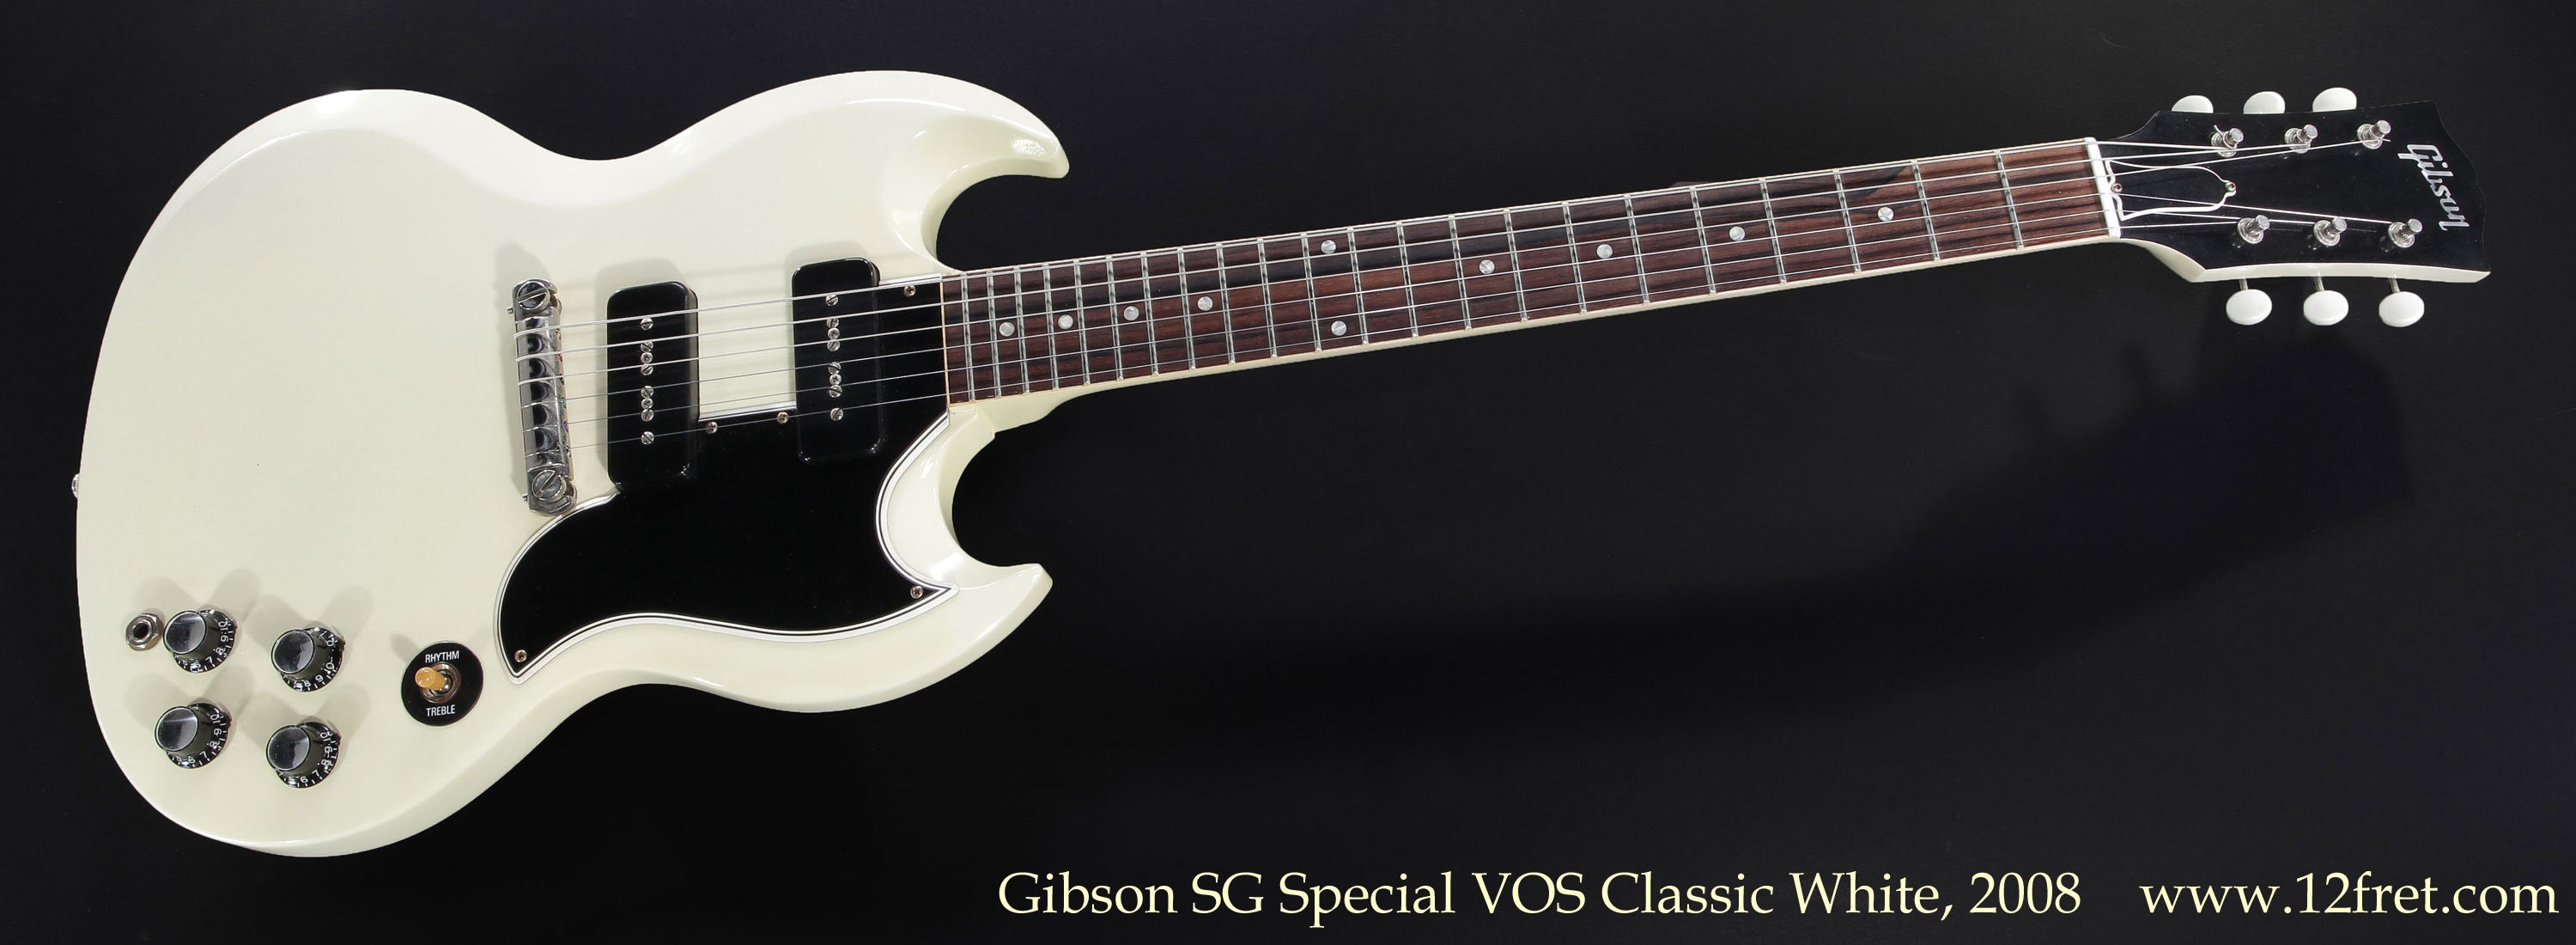 Gibson SG Special VOS Classic White, 2008  - The Twelfth Fret